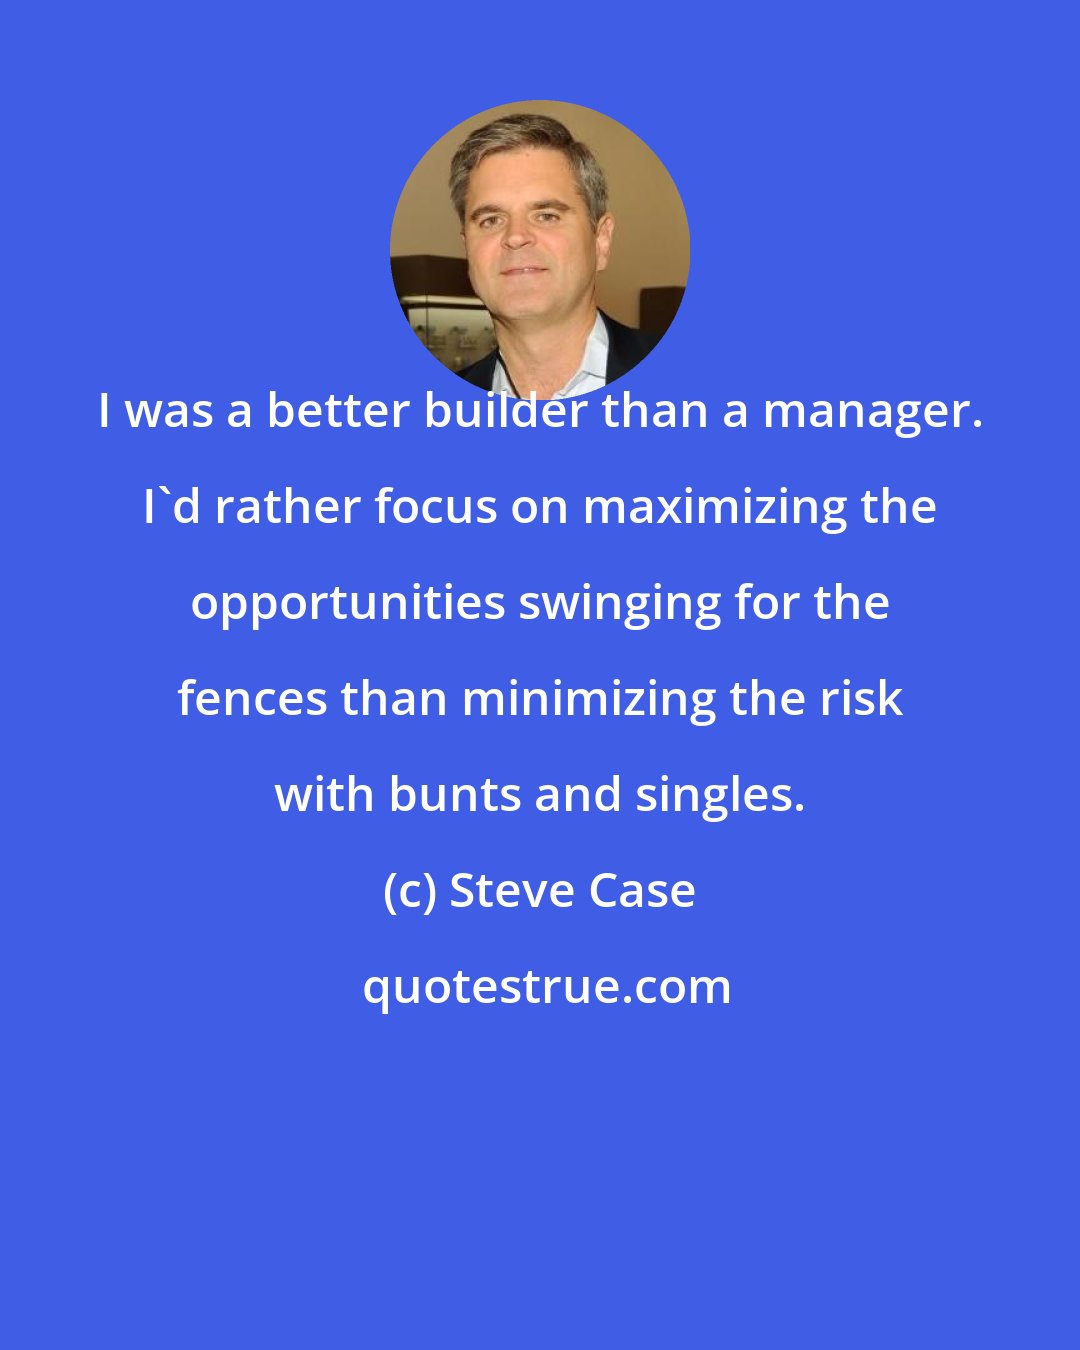 Steve Case: I was a better builder than a manager. I'd rather focus on maximizing the opportunities swinging for the fences than minimizing the risk with bunts and singles.